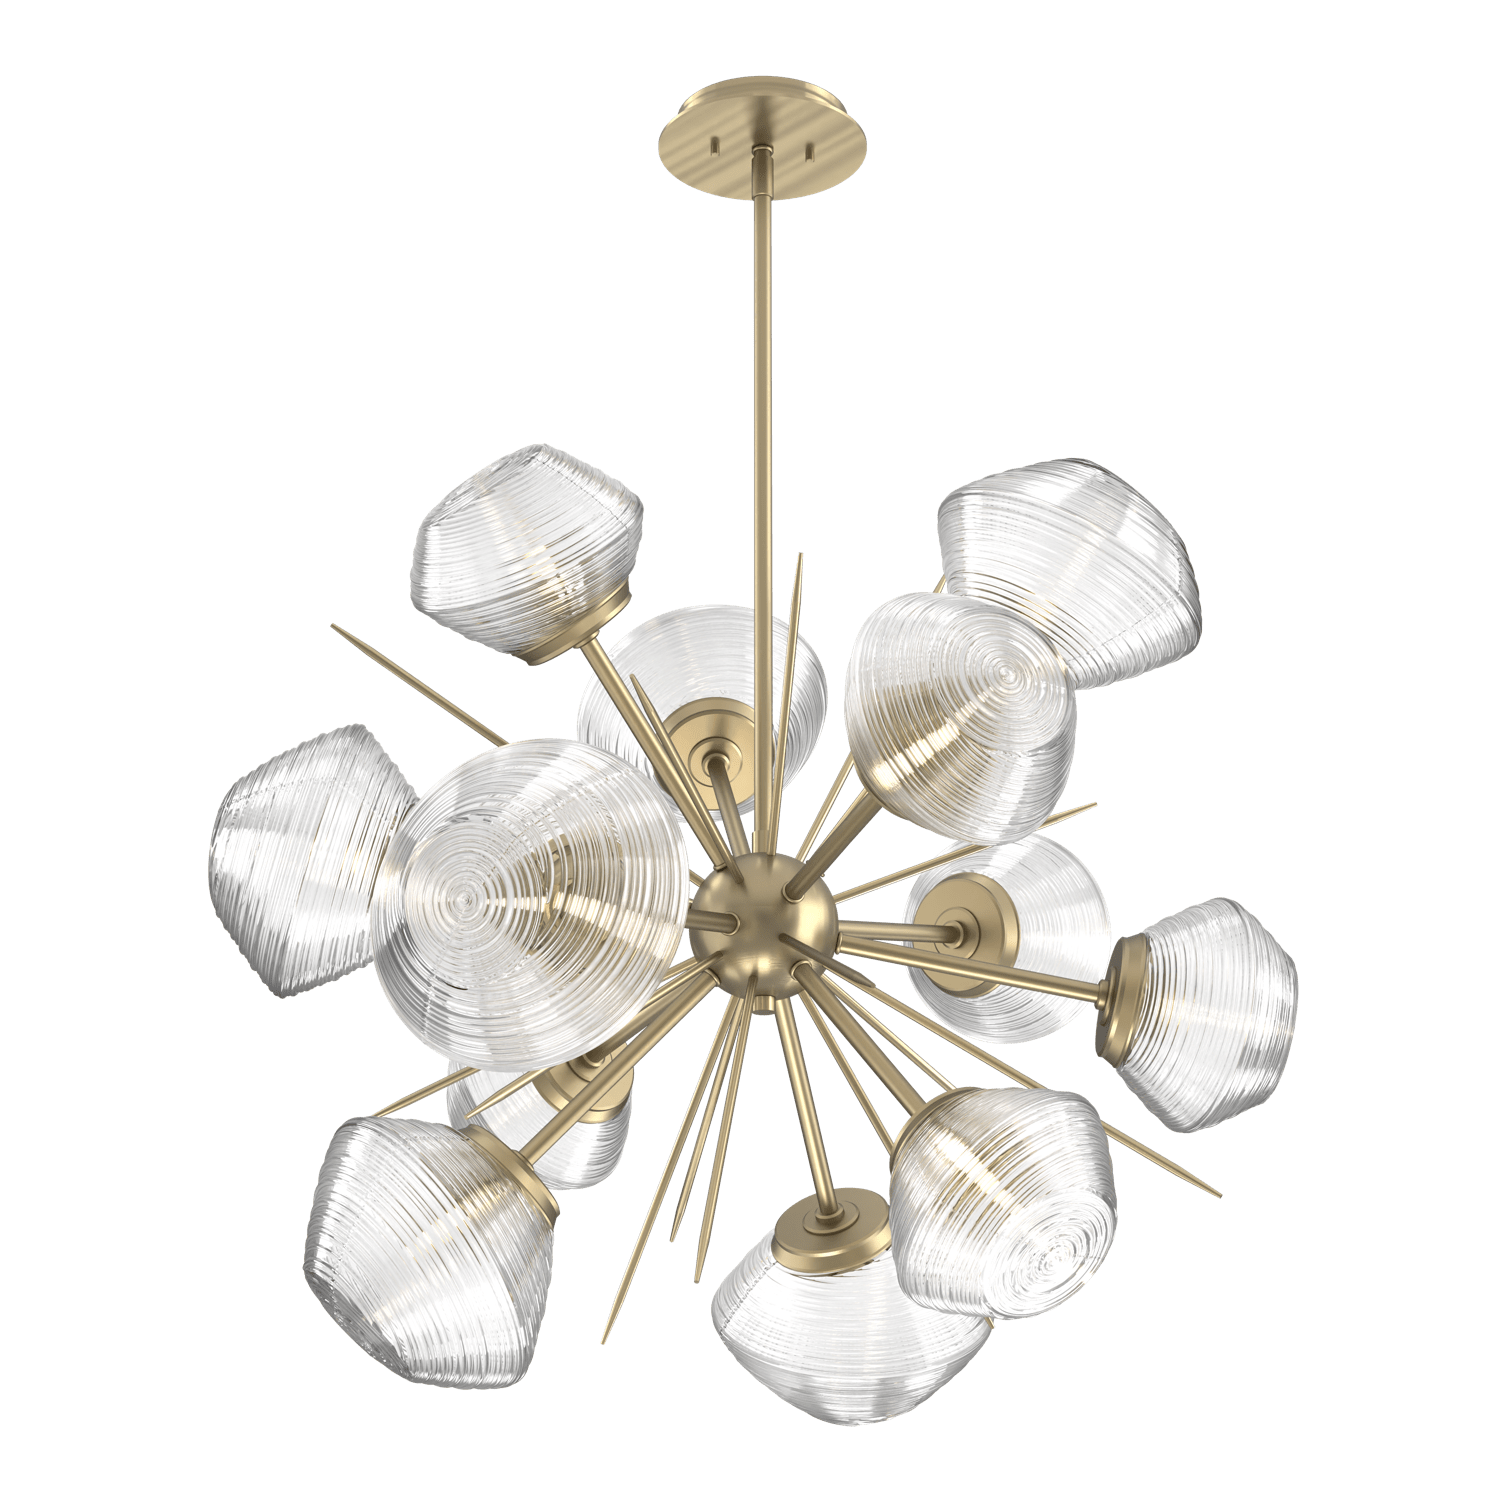 CHB0089-0G-HB-C-Hammerton-Studio-Mesa-36-inch-starburst-chandelier-with-heritage-brass-finish-and-clear-blown-glass-shades-and-LED-lamping